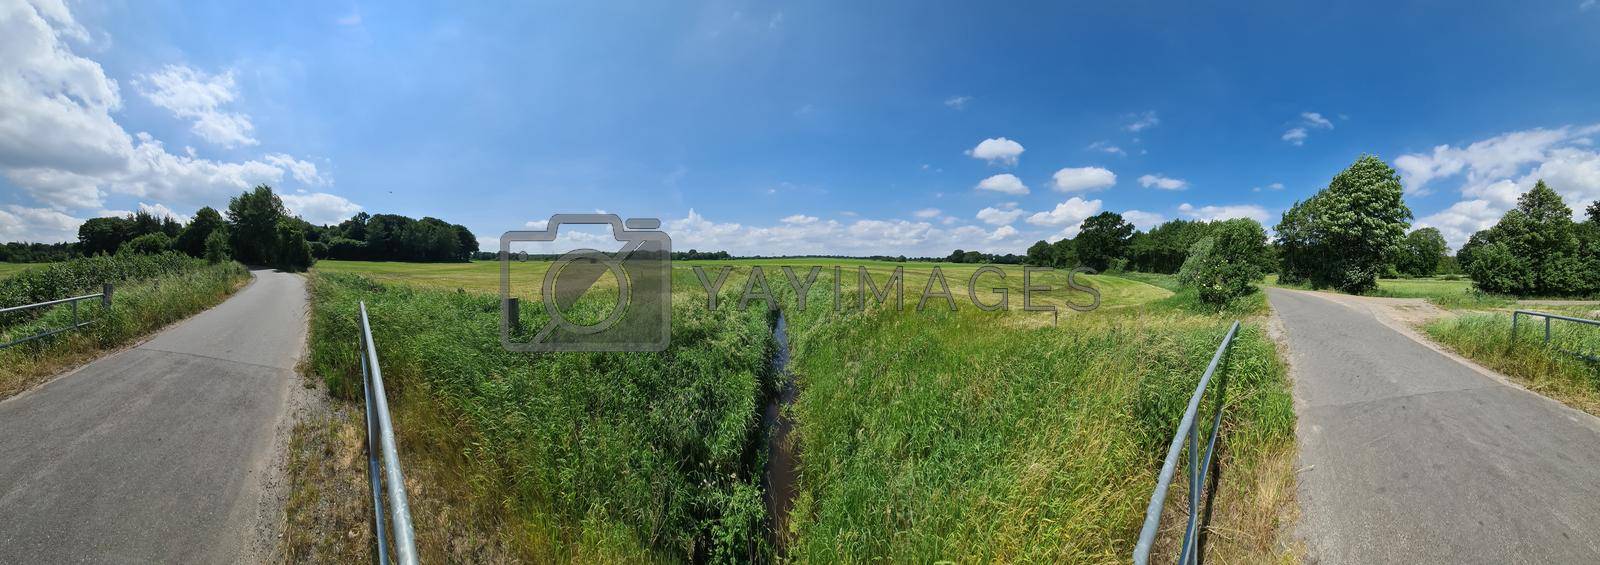 Panorama of countryside roads with fields and trees in northern europe.